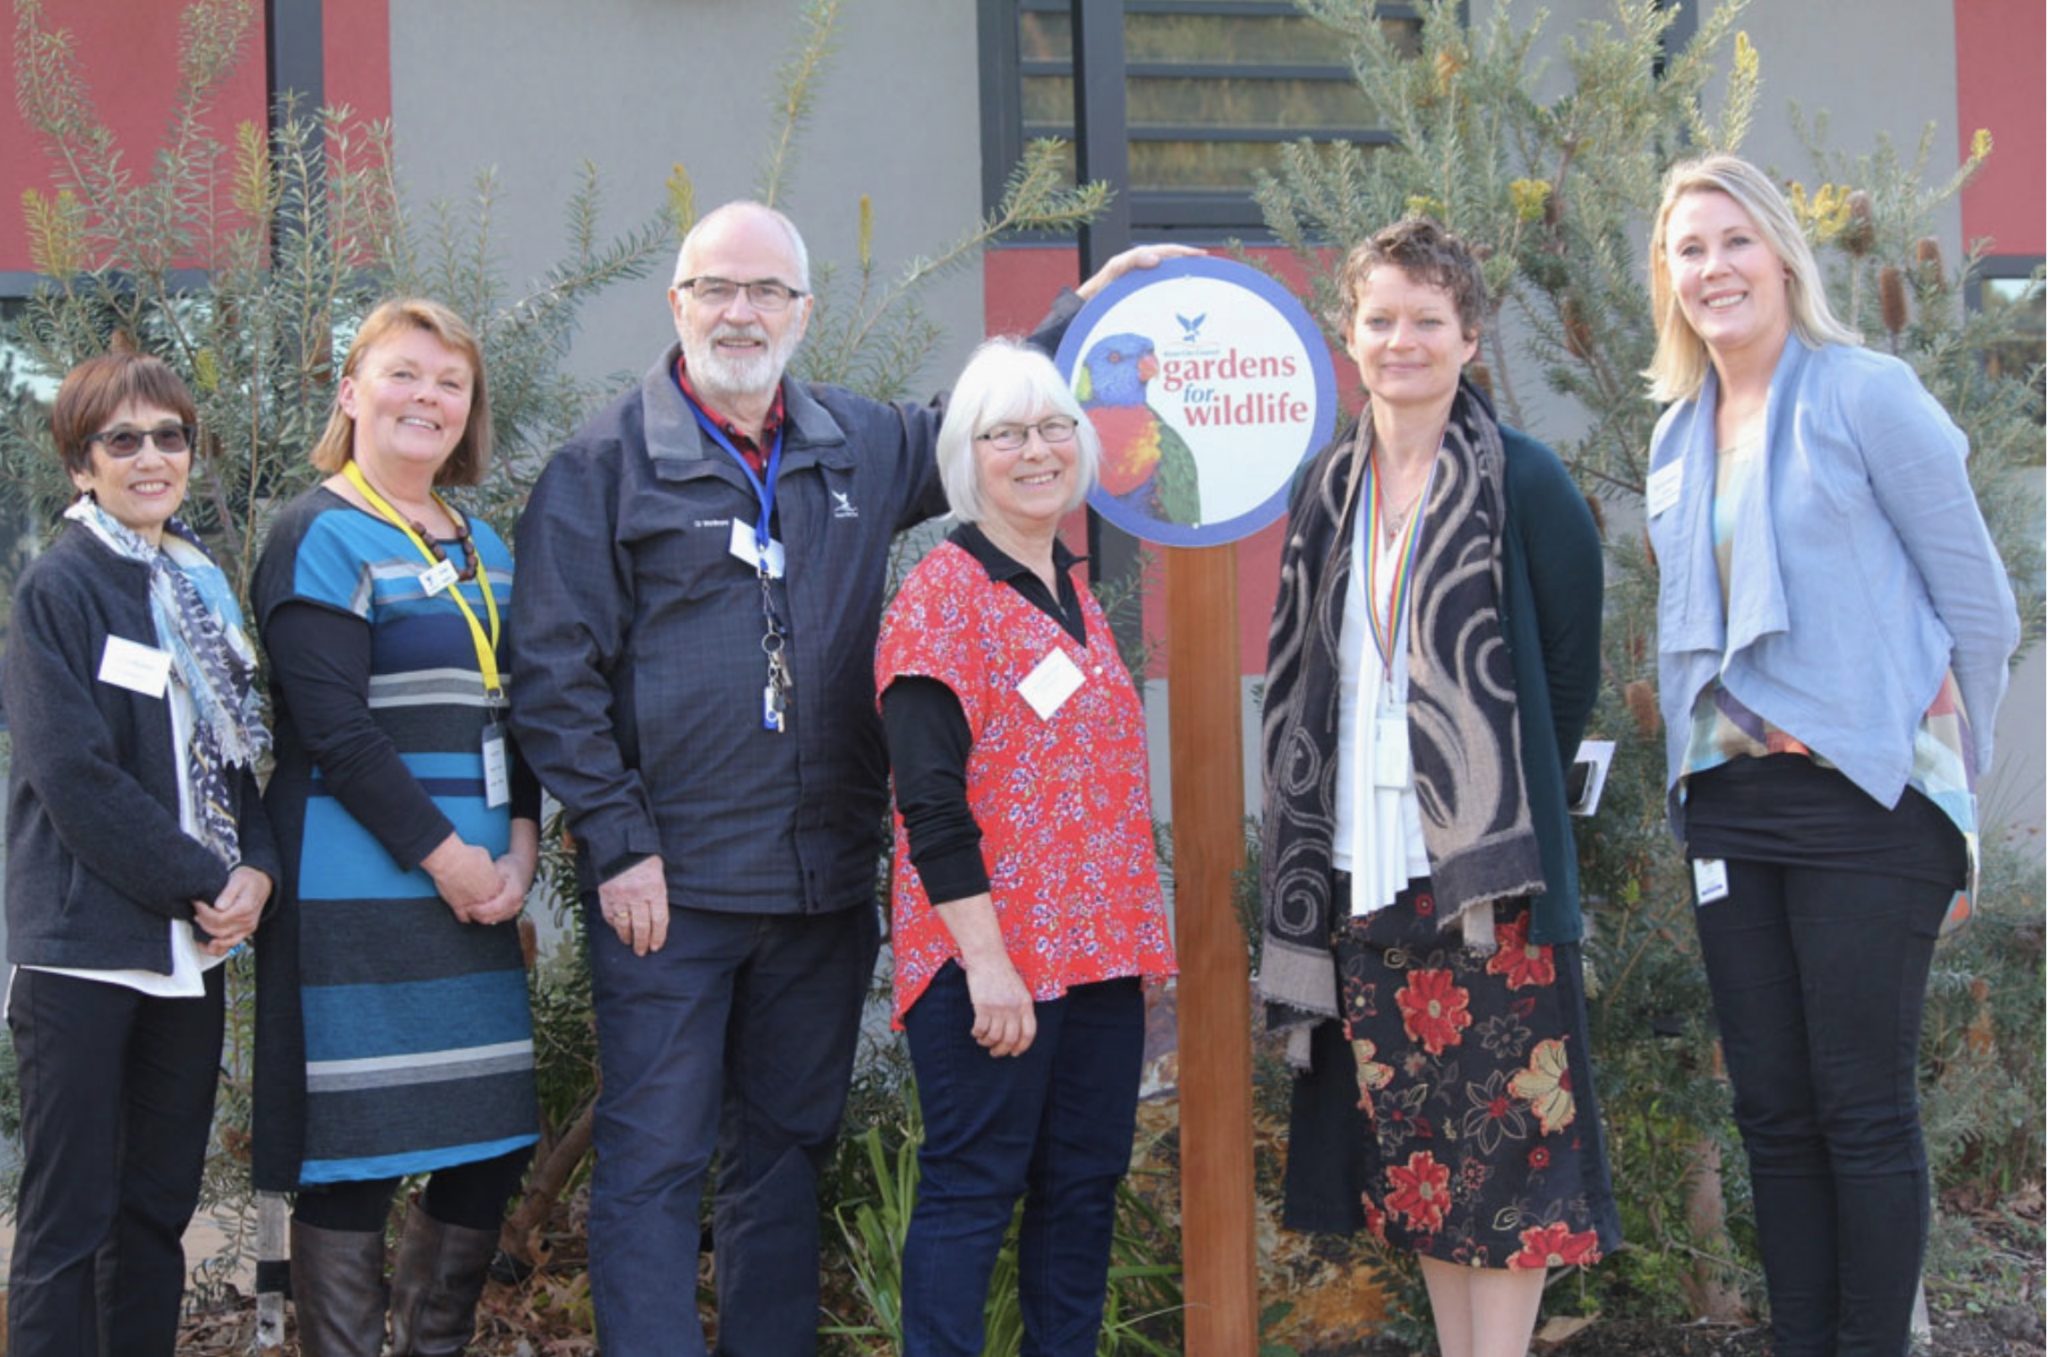 Pictured (left to right): Dr Laura Mumaw launching the Gardens for Wildlife initiative with Nadine Gaskell, Knox City Council, Cr John Mortimore, Mayor Knox City Council, Erica Peters, Gardens for Wildlife volunteer and KES member, Kelly Crosthwaite, Regional Director DELWP Port Phillip Region and Melinda Bowen, DELWP Community Partnership Program Officer.